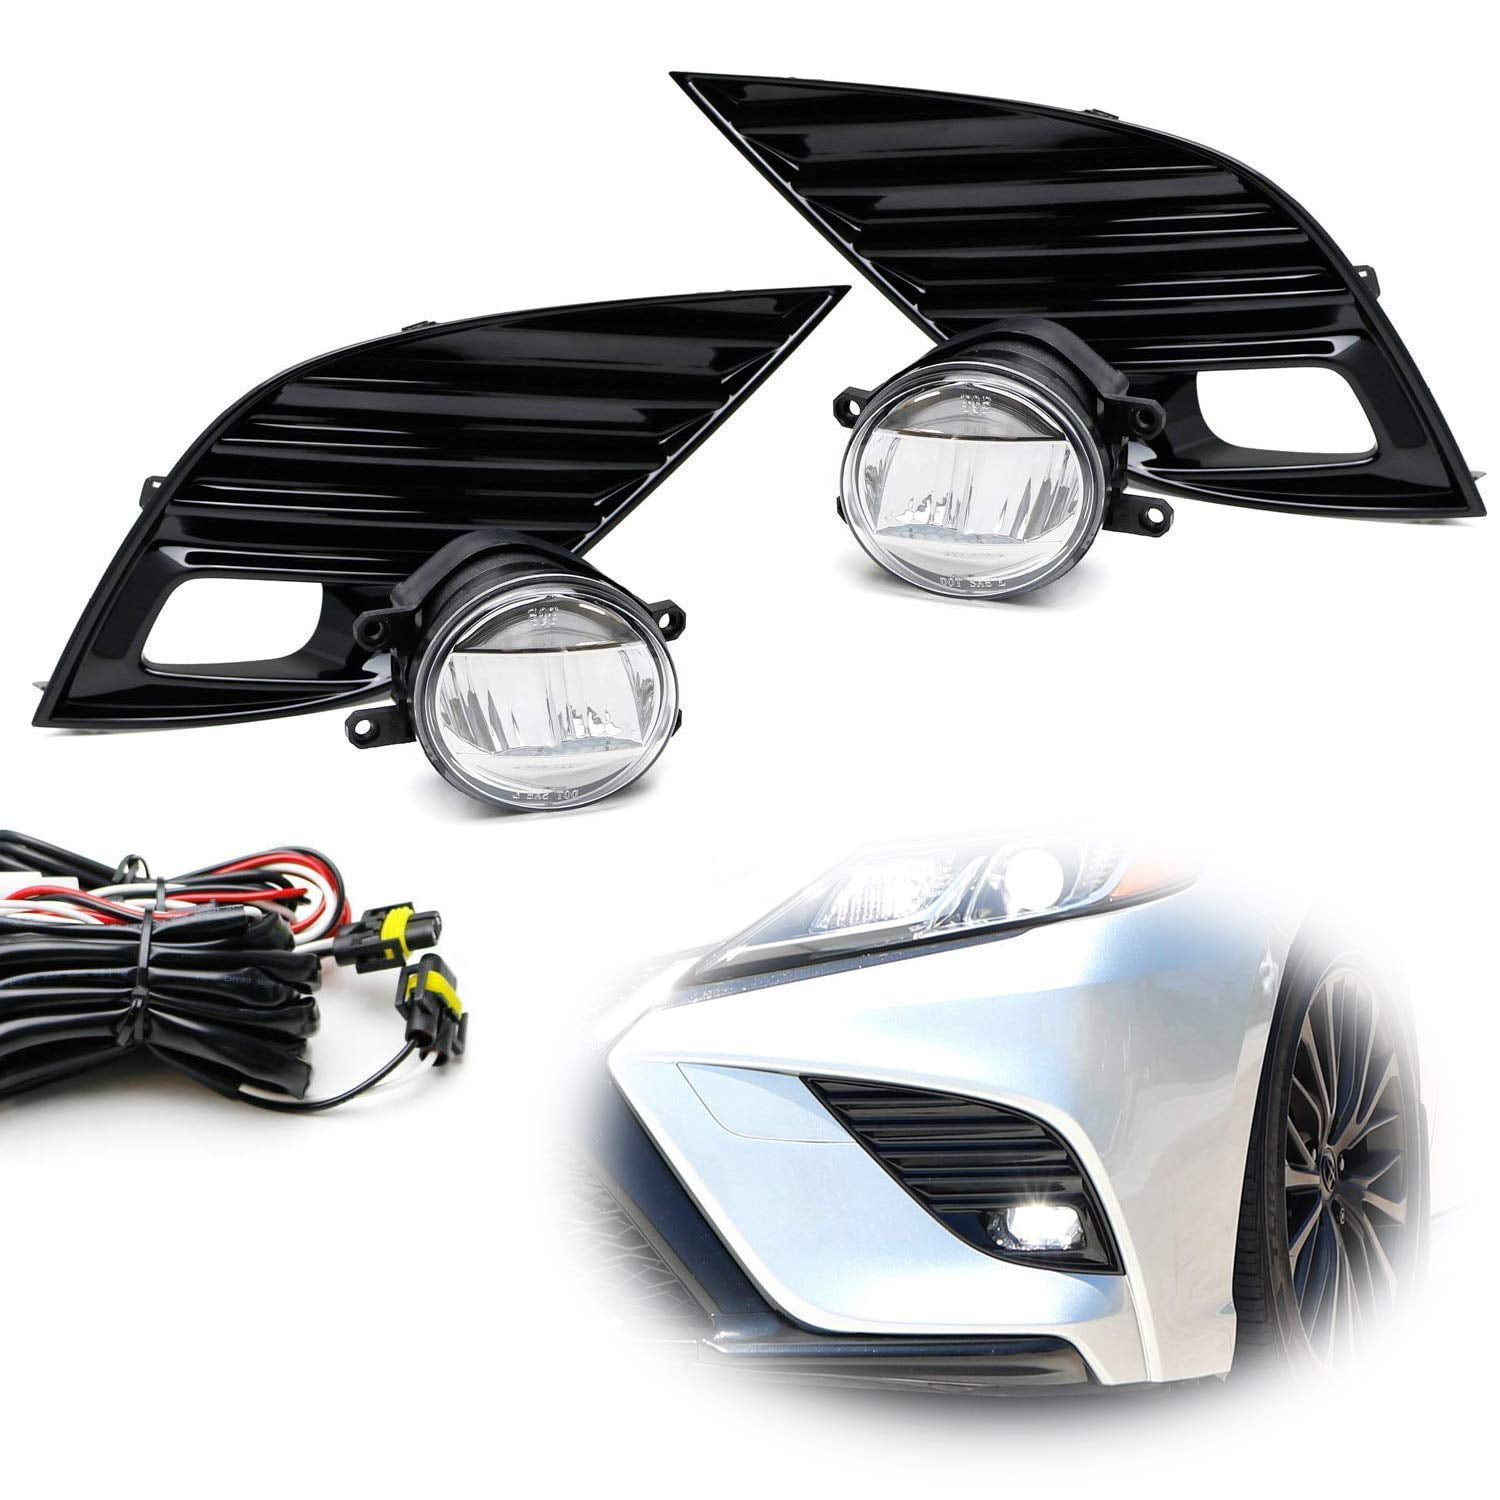 iJDMTOY JDM Style OEMSpec 15W LED Fog Light Kit Compatible With 2018